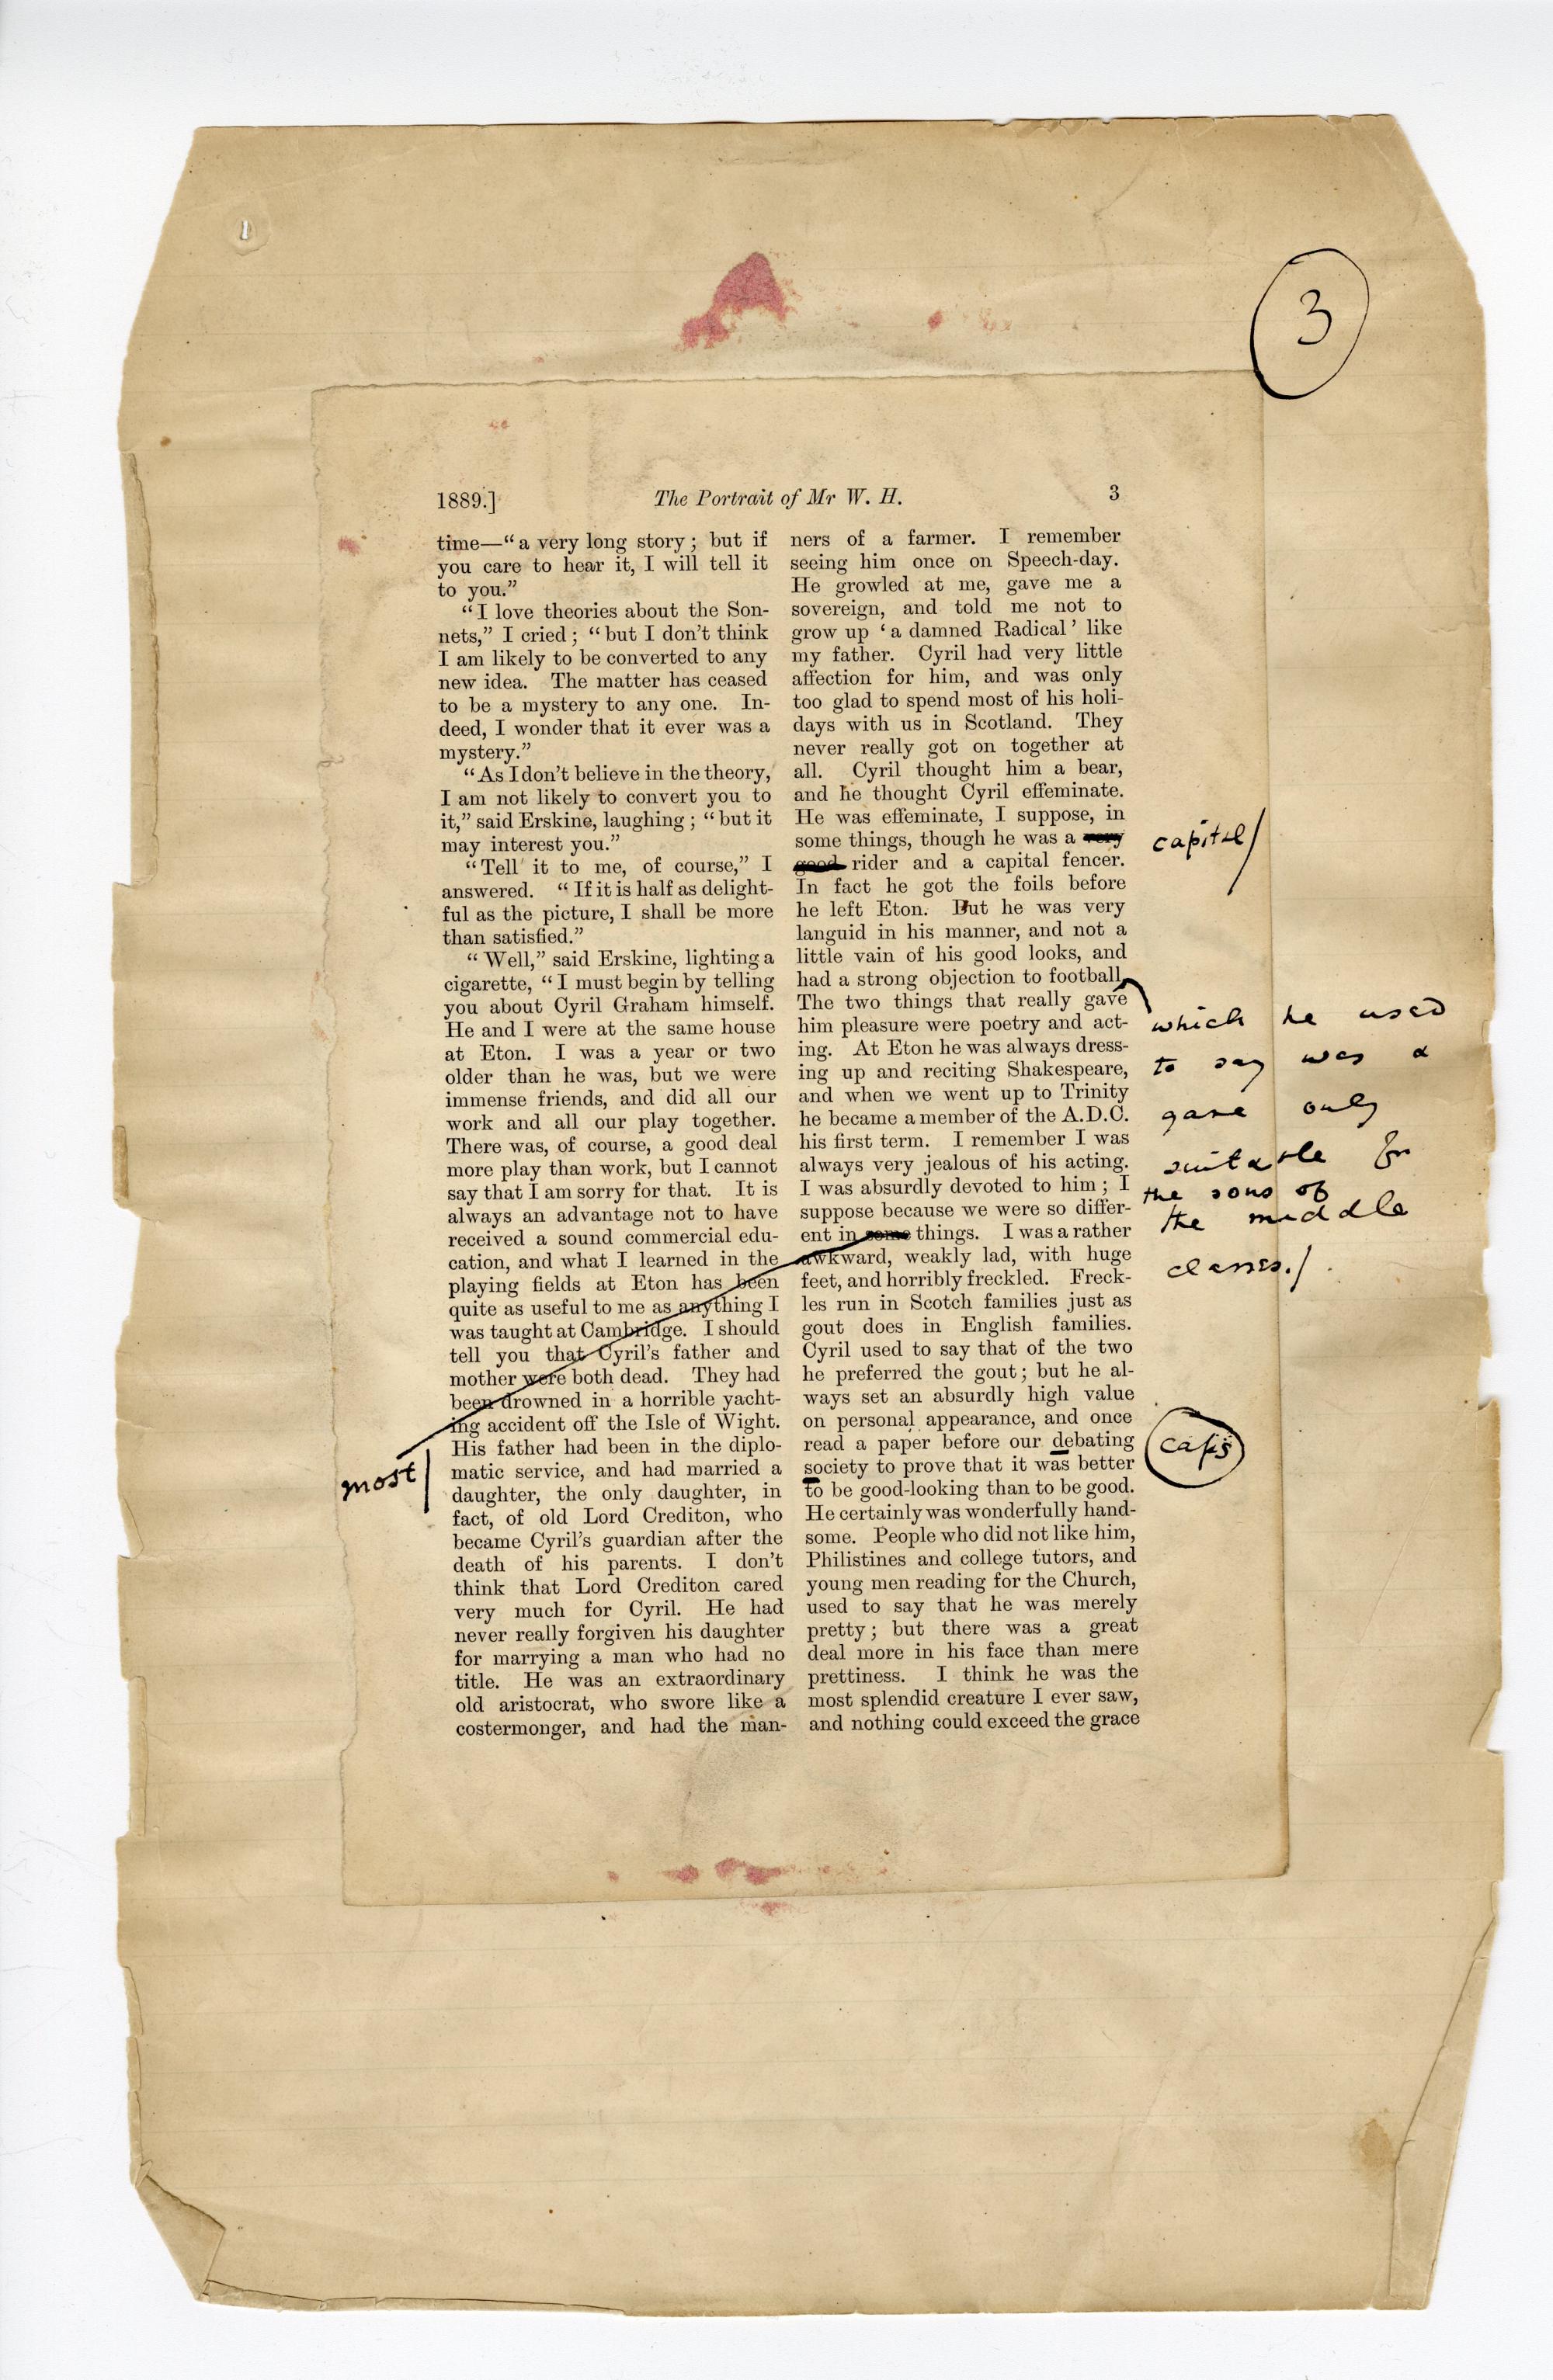 Folio 3 with Wilde's handwritten annotations in the margins of the page.